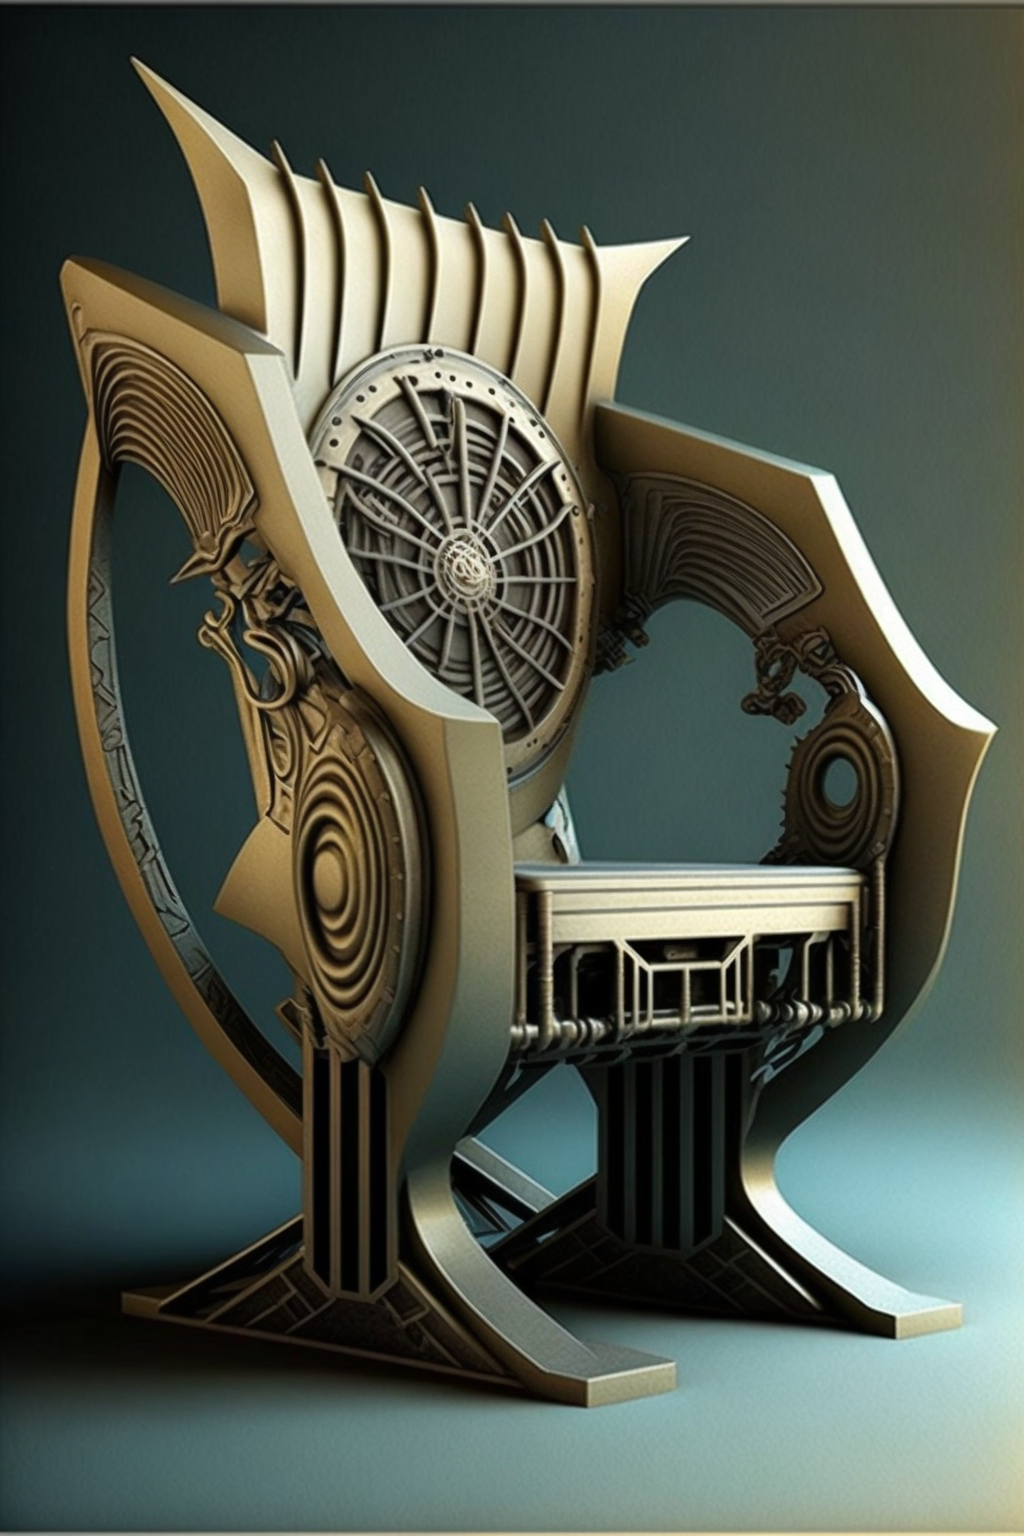 Chair in the style of Mechano-Gothic Deco-Futurism 7